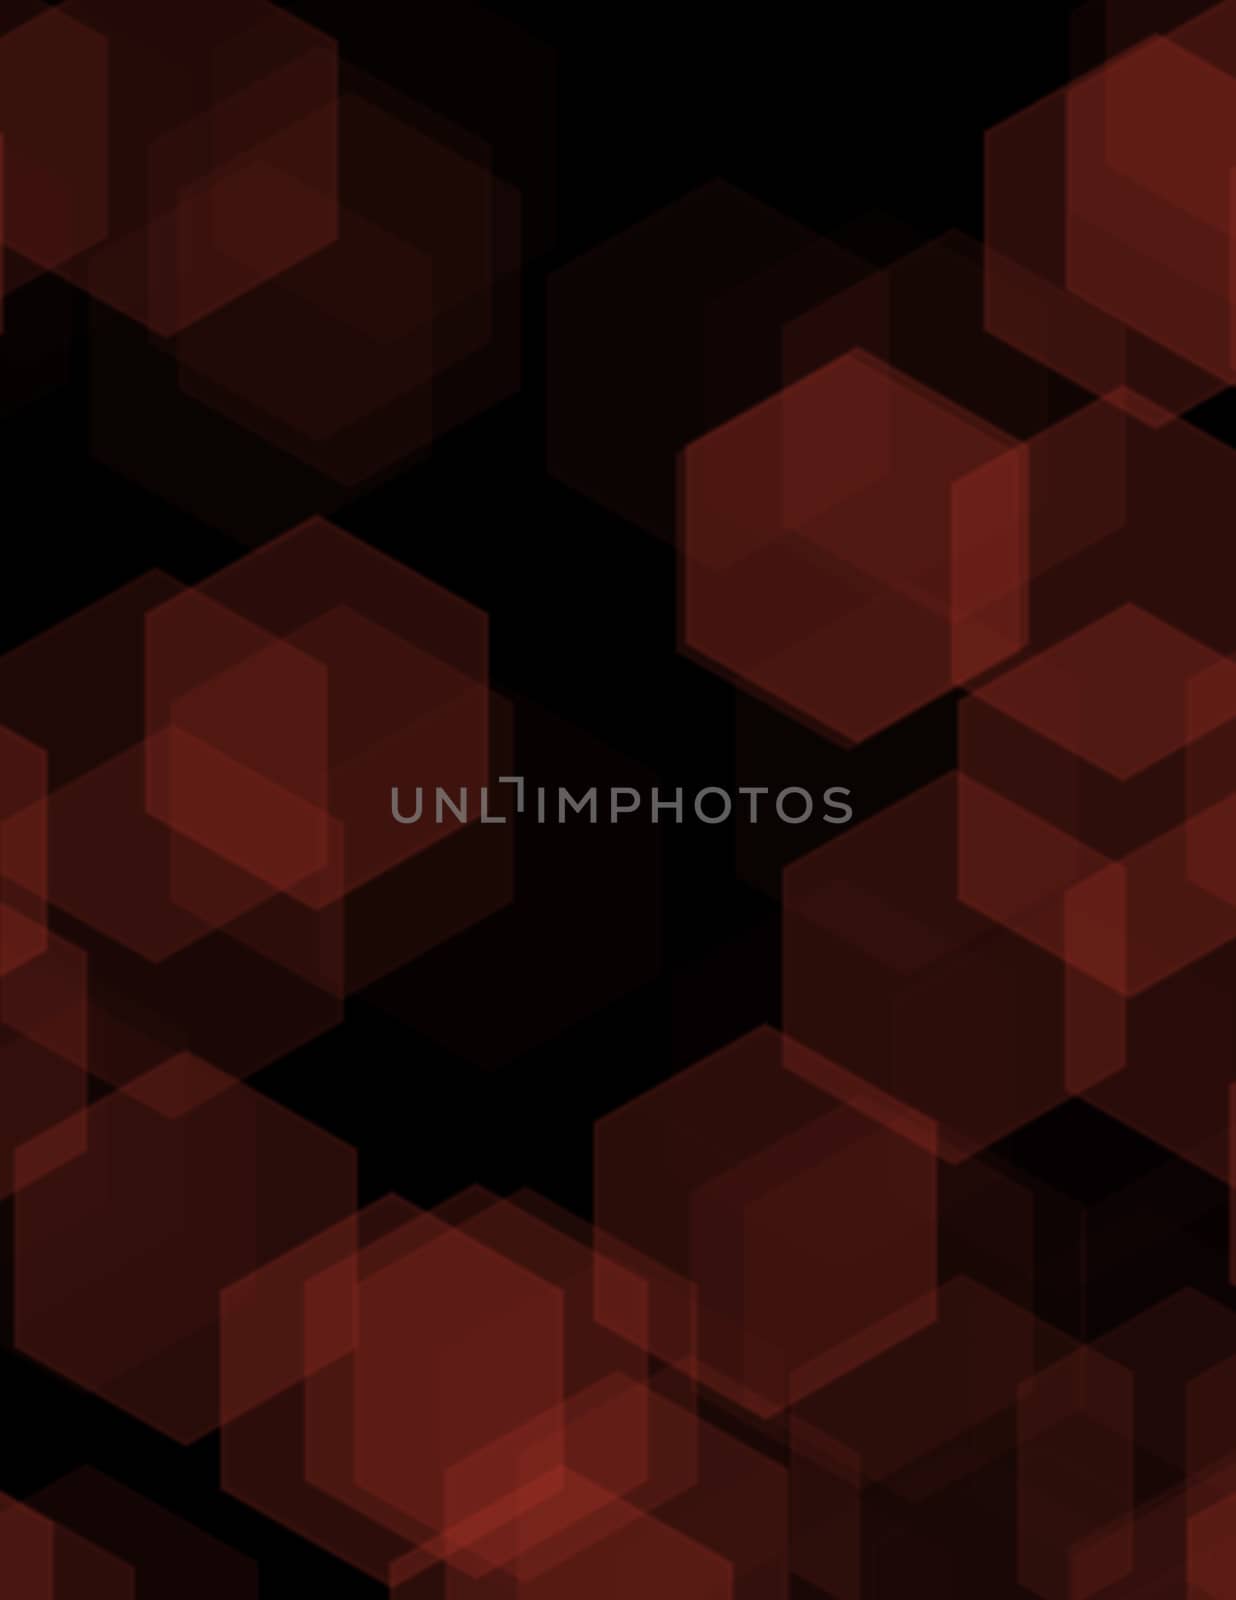 Black abstract geometric background formed with colored hexagons in rows